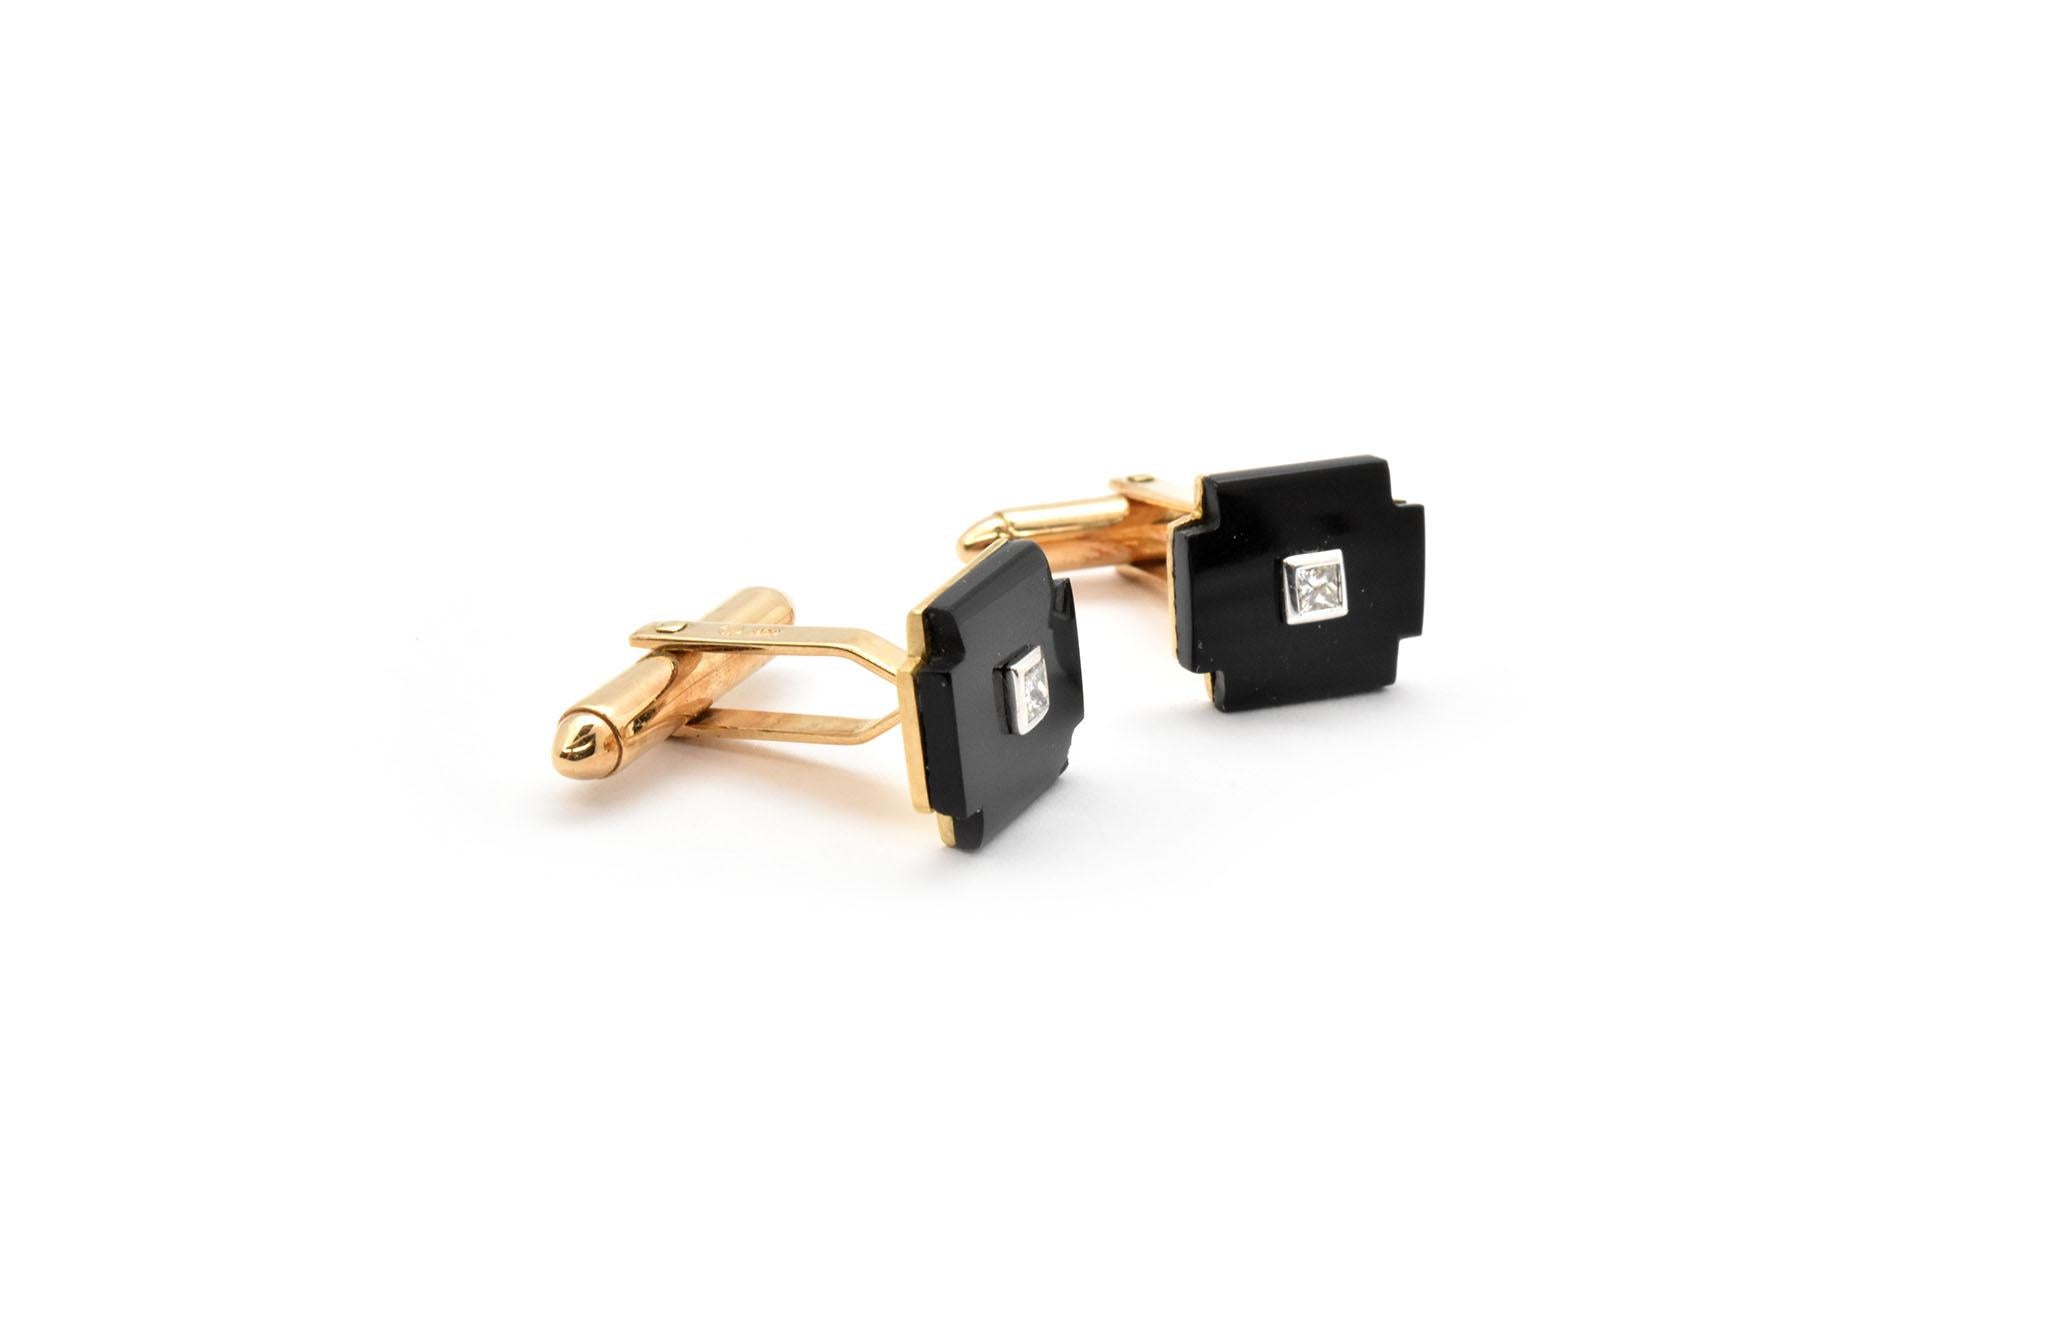 This pair of geometric cufflinks would be the perfect accessory for a classy dress shirt on the way to a power lunch or dinner party! Each cufflink is designed in 14k yellow gold featuring a 11.75x13.42mm rectangular notched corner black onyx with